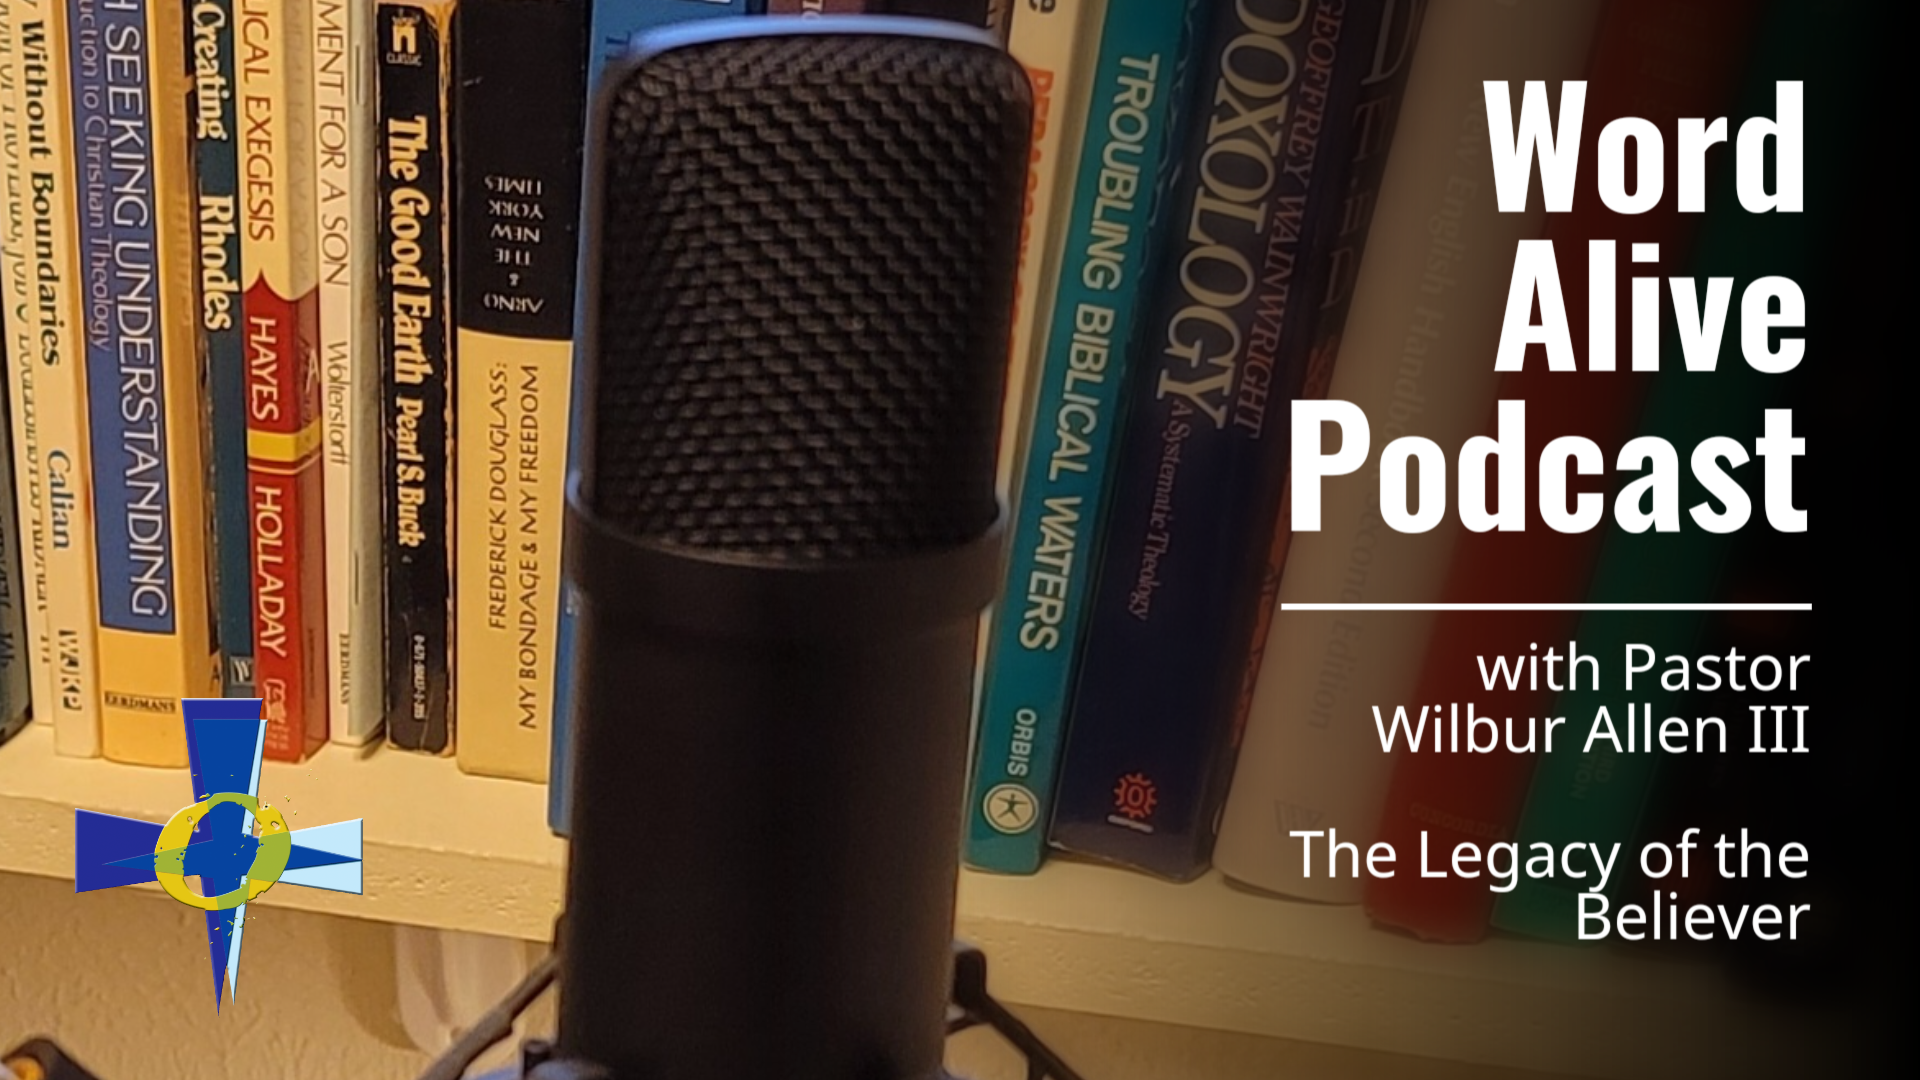 Word Alive Podcast - The Legacy of the Believer